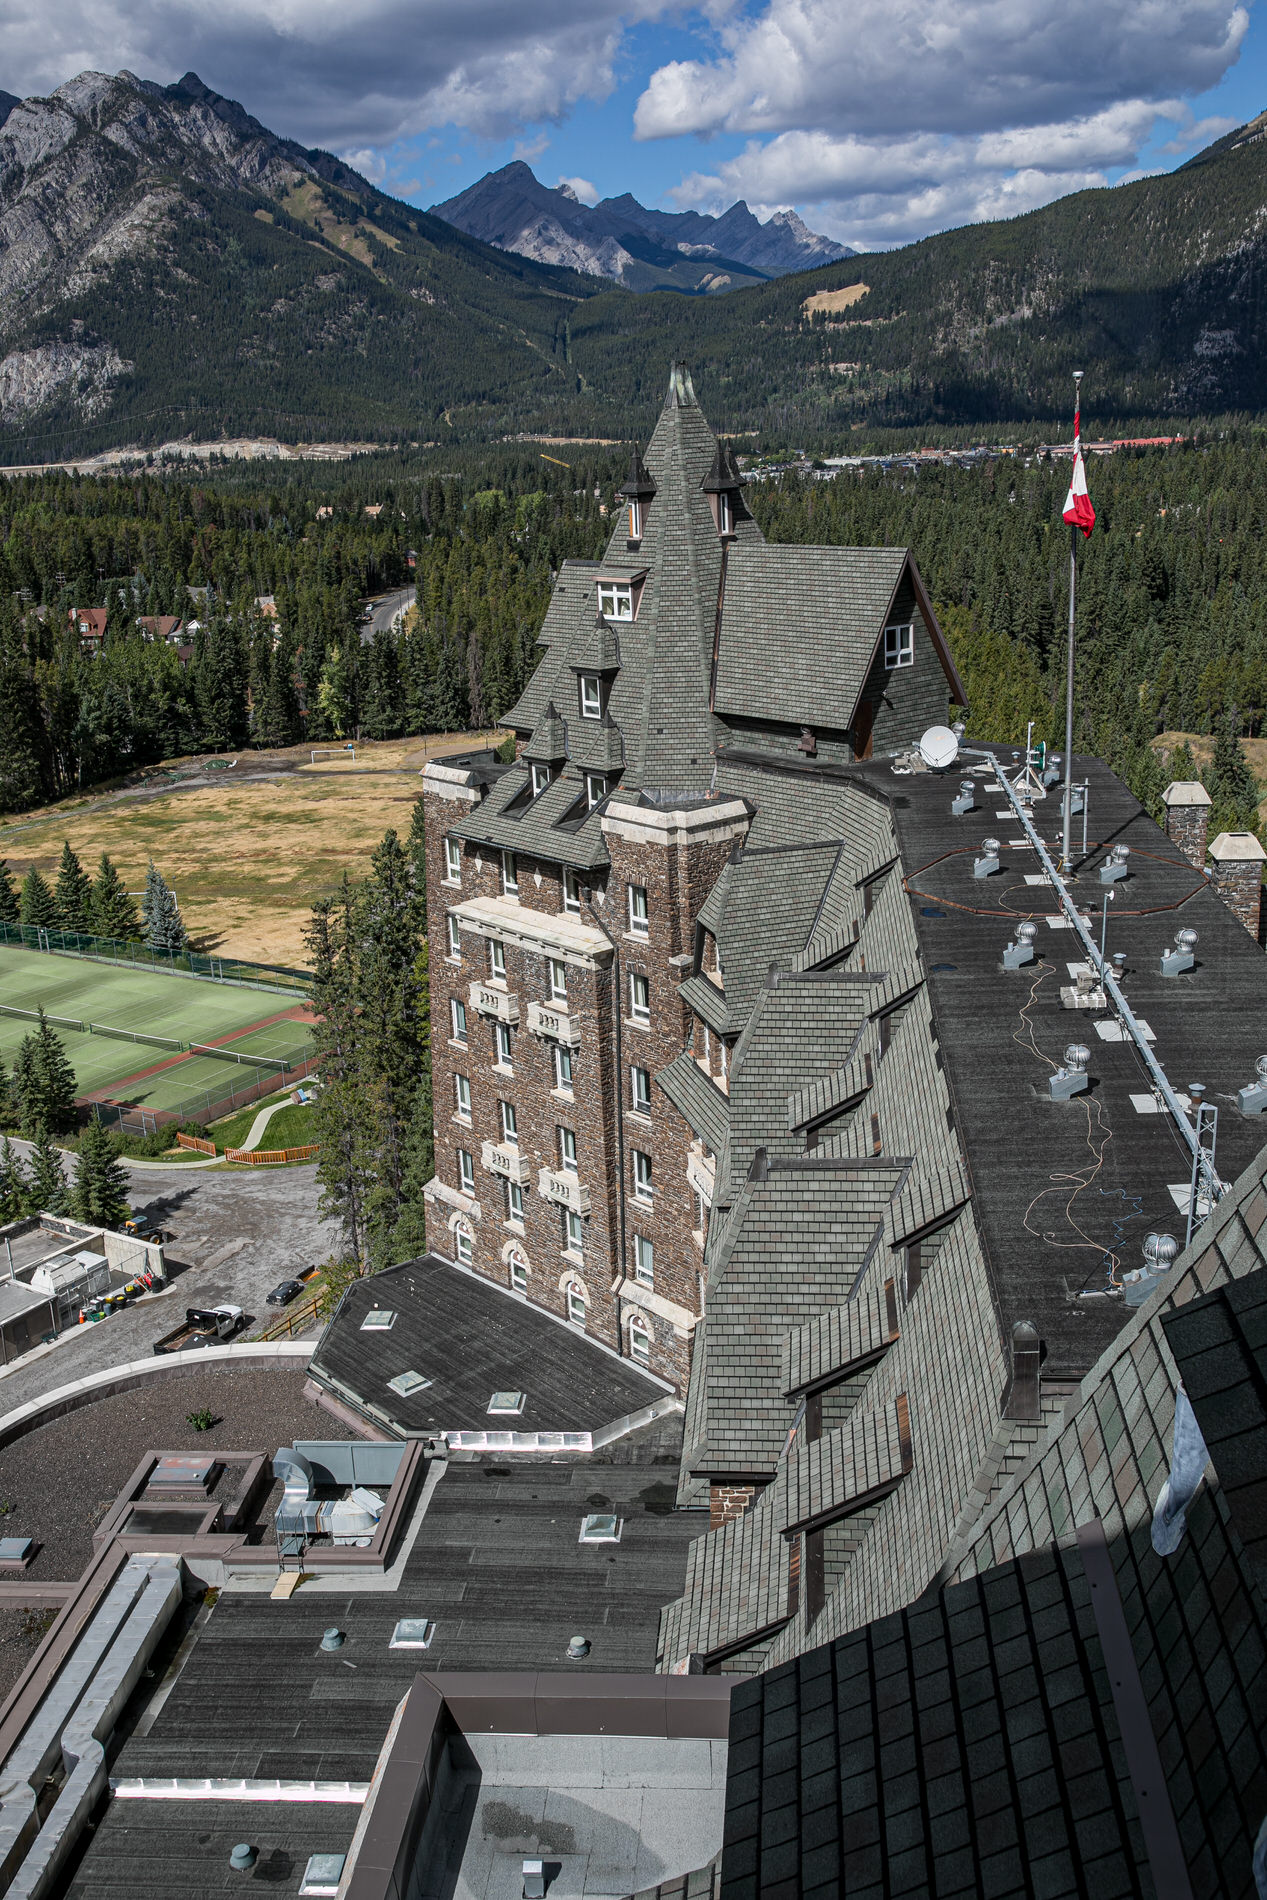 View from the Royal Suite at the Fairmont Banff Springs Hotel